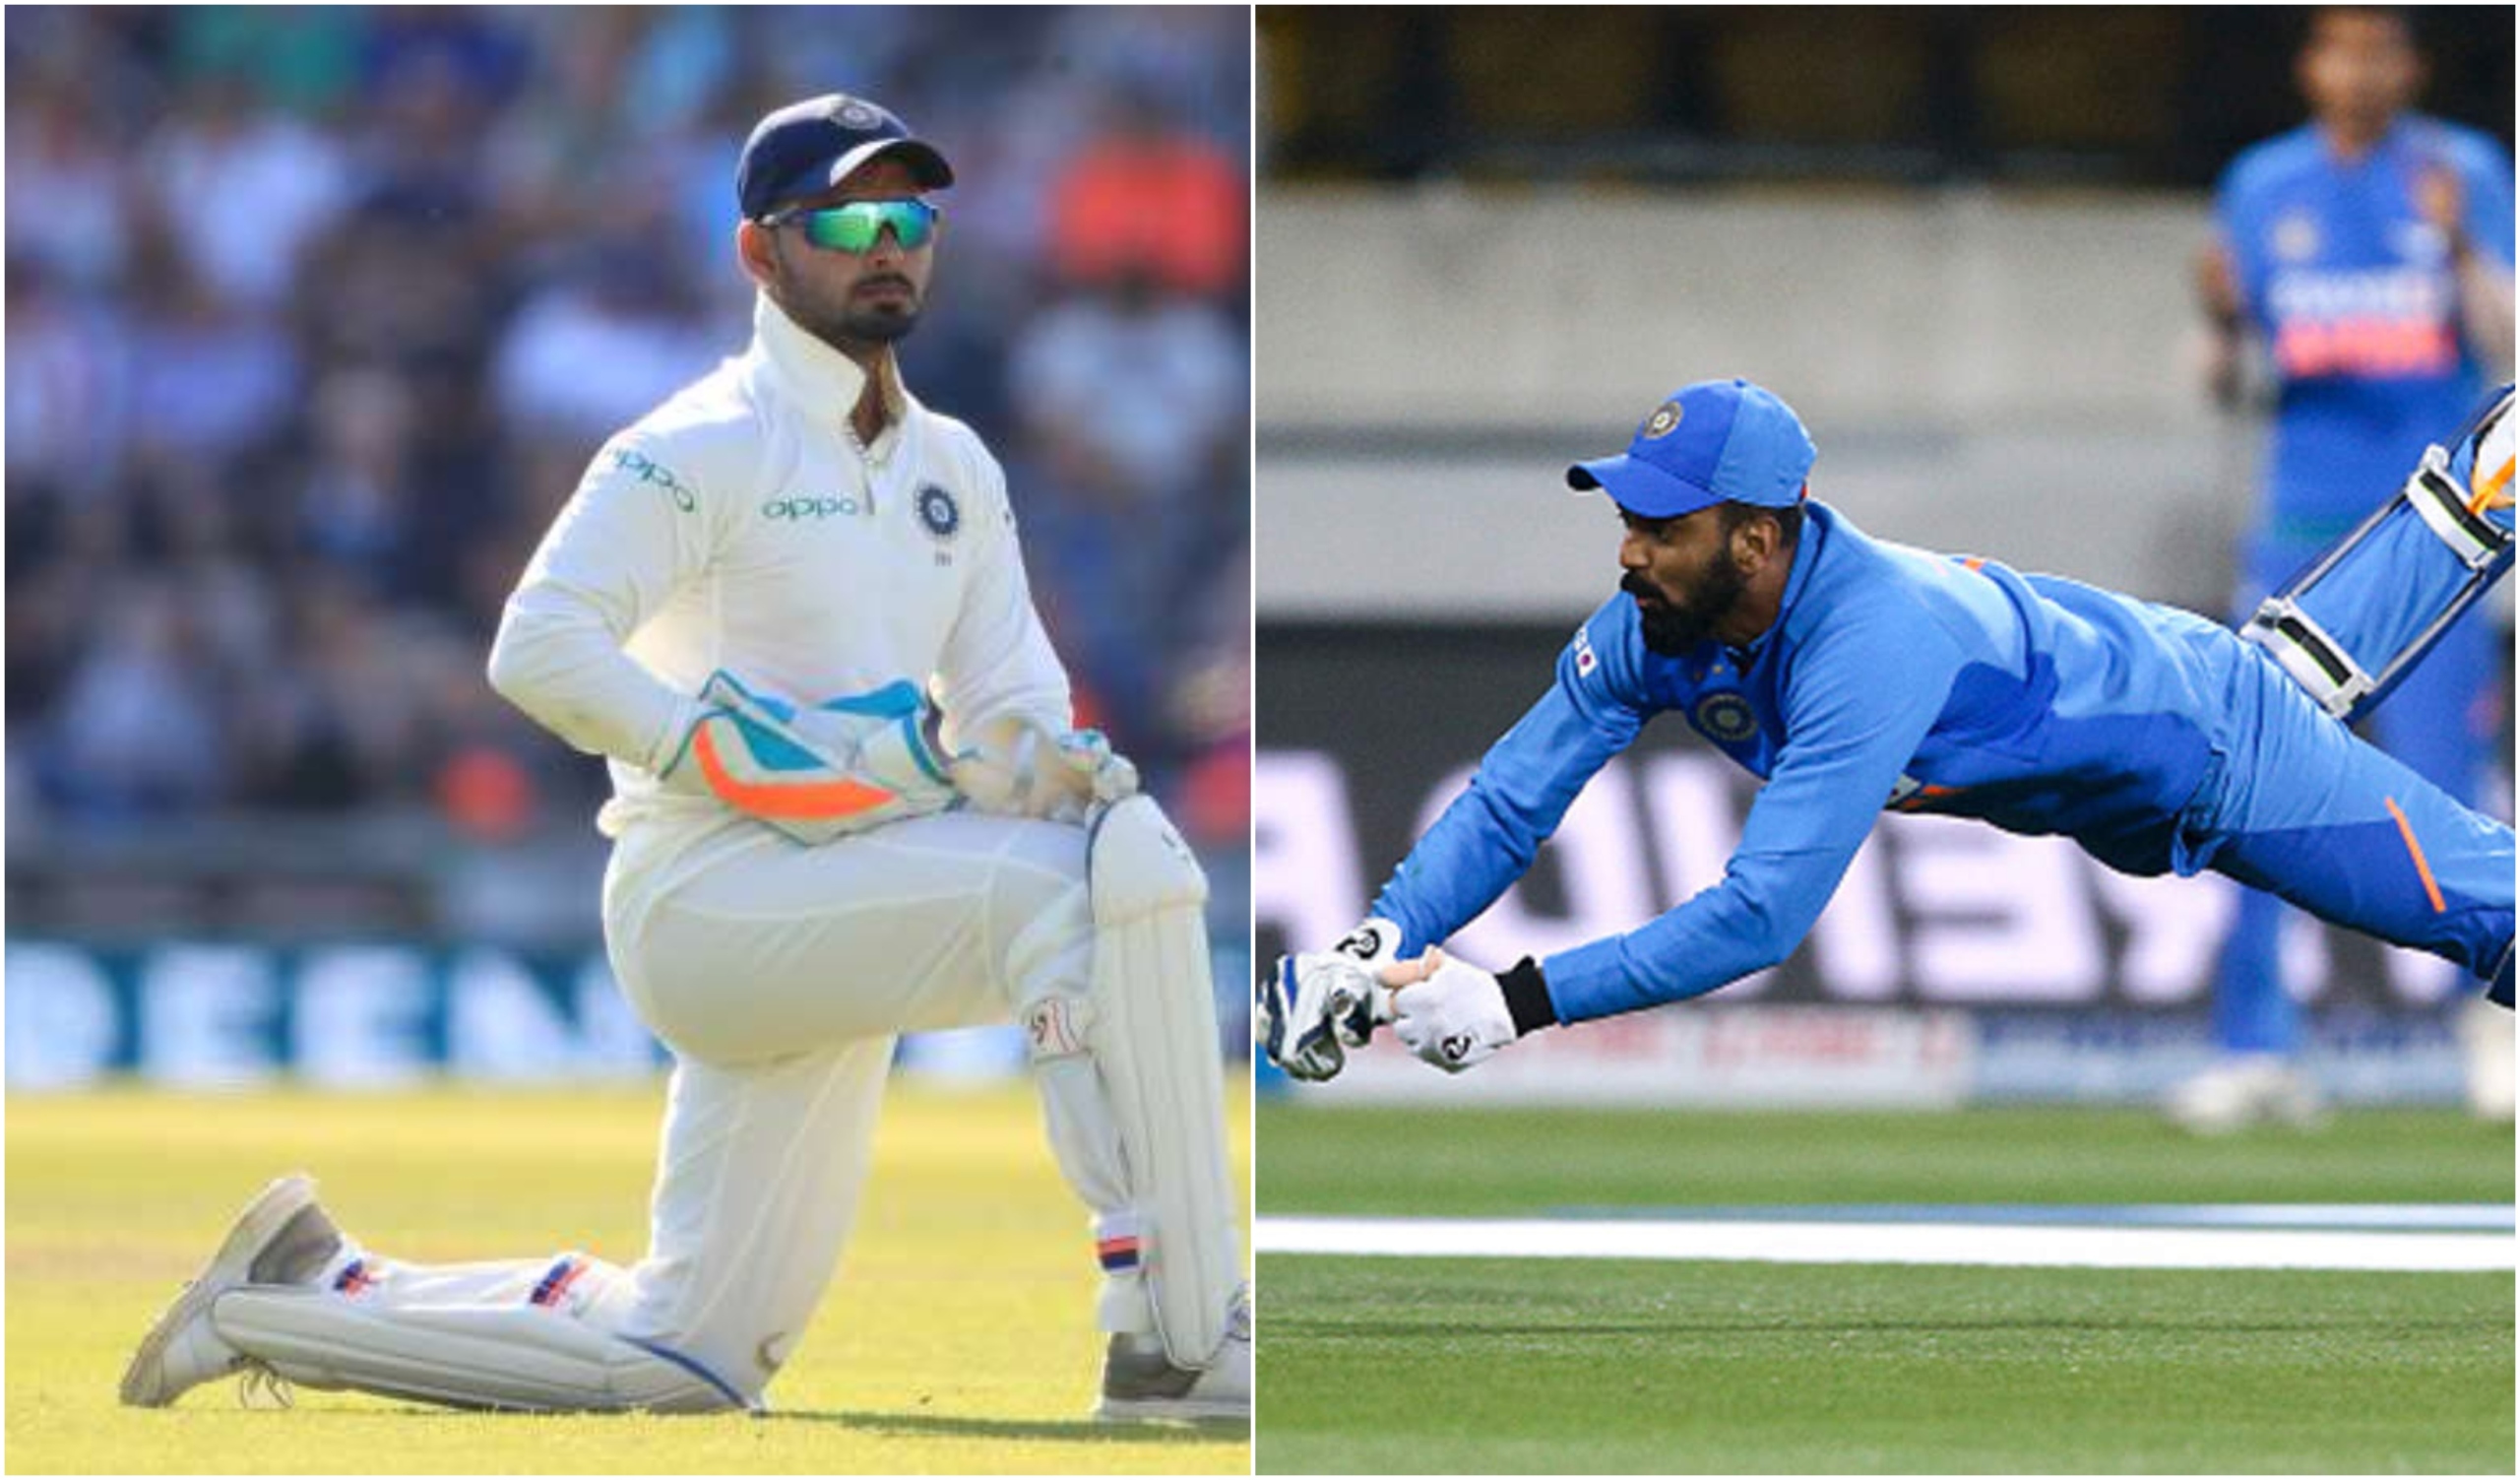 Wicket-keeping: An open vacancy for KL Rahul and Rishabh Pant after Dhoni has retired